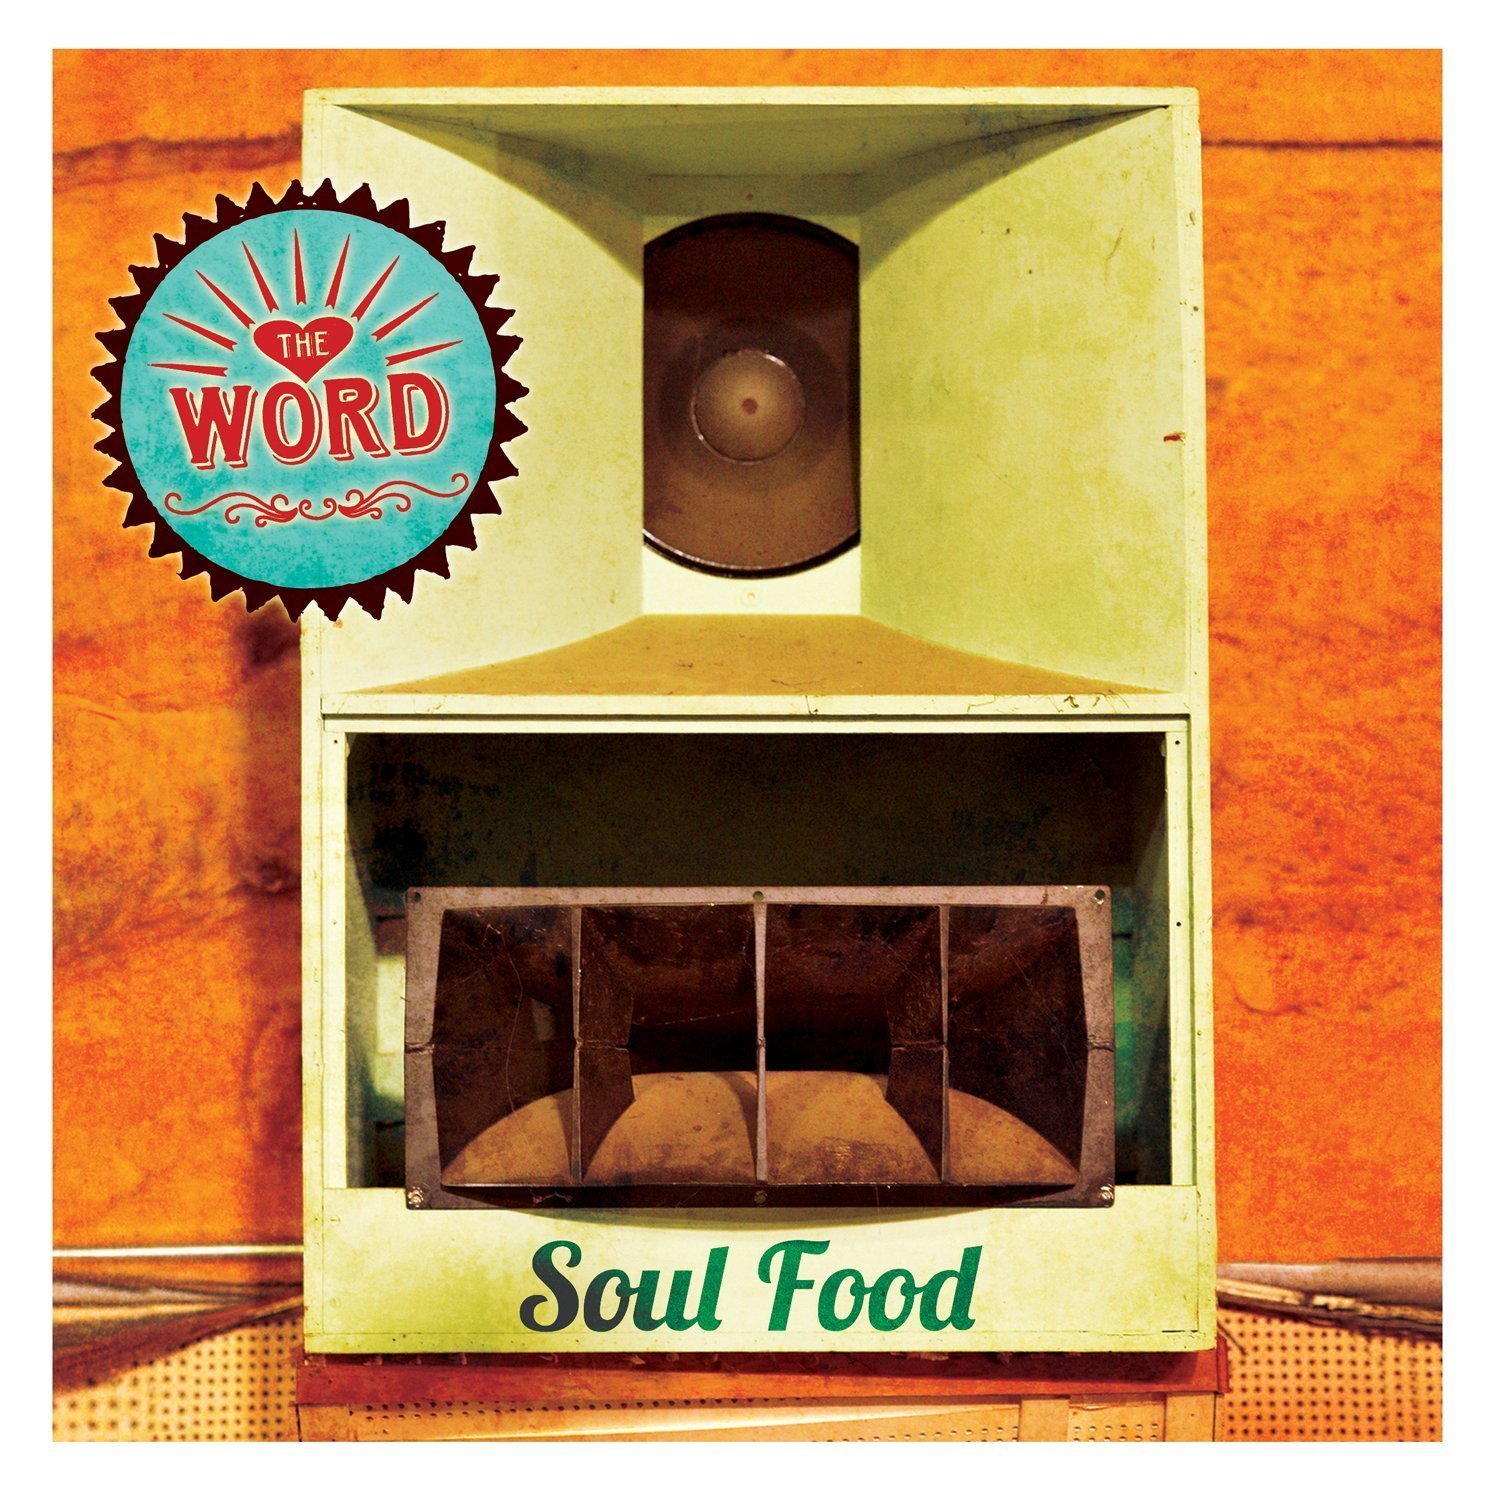 The-Word-Soul-Food-album-cover-2015